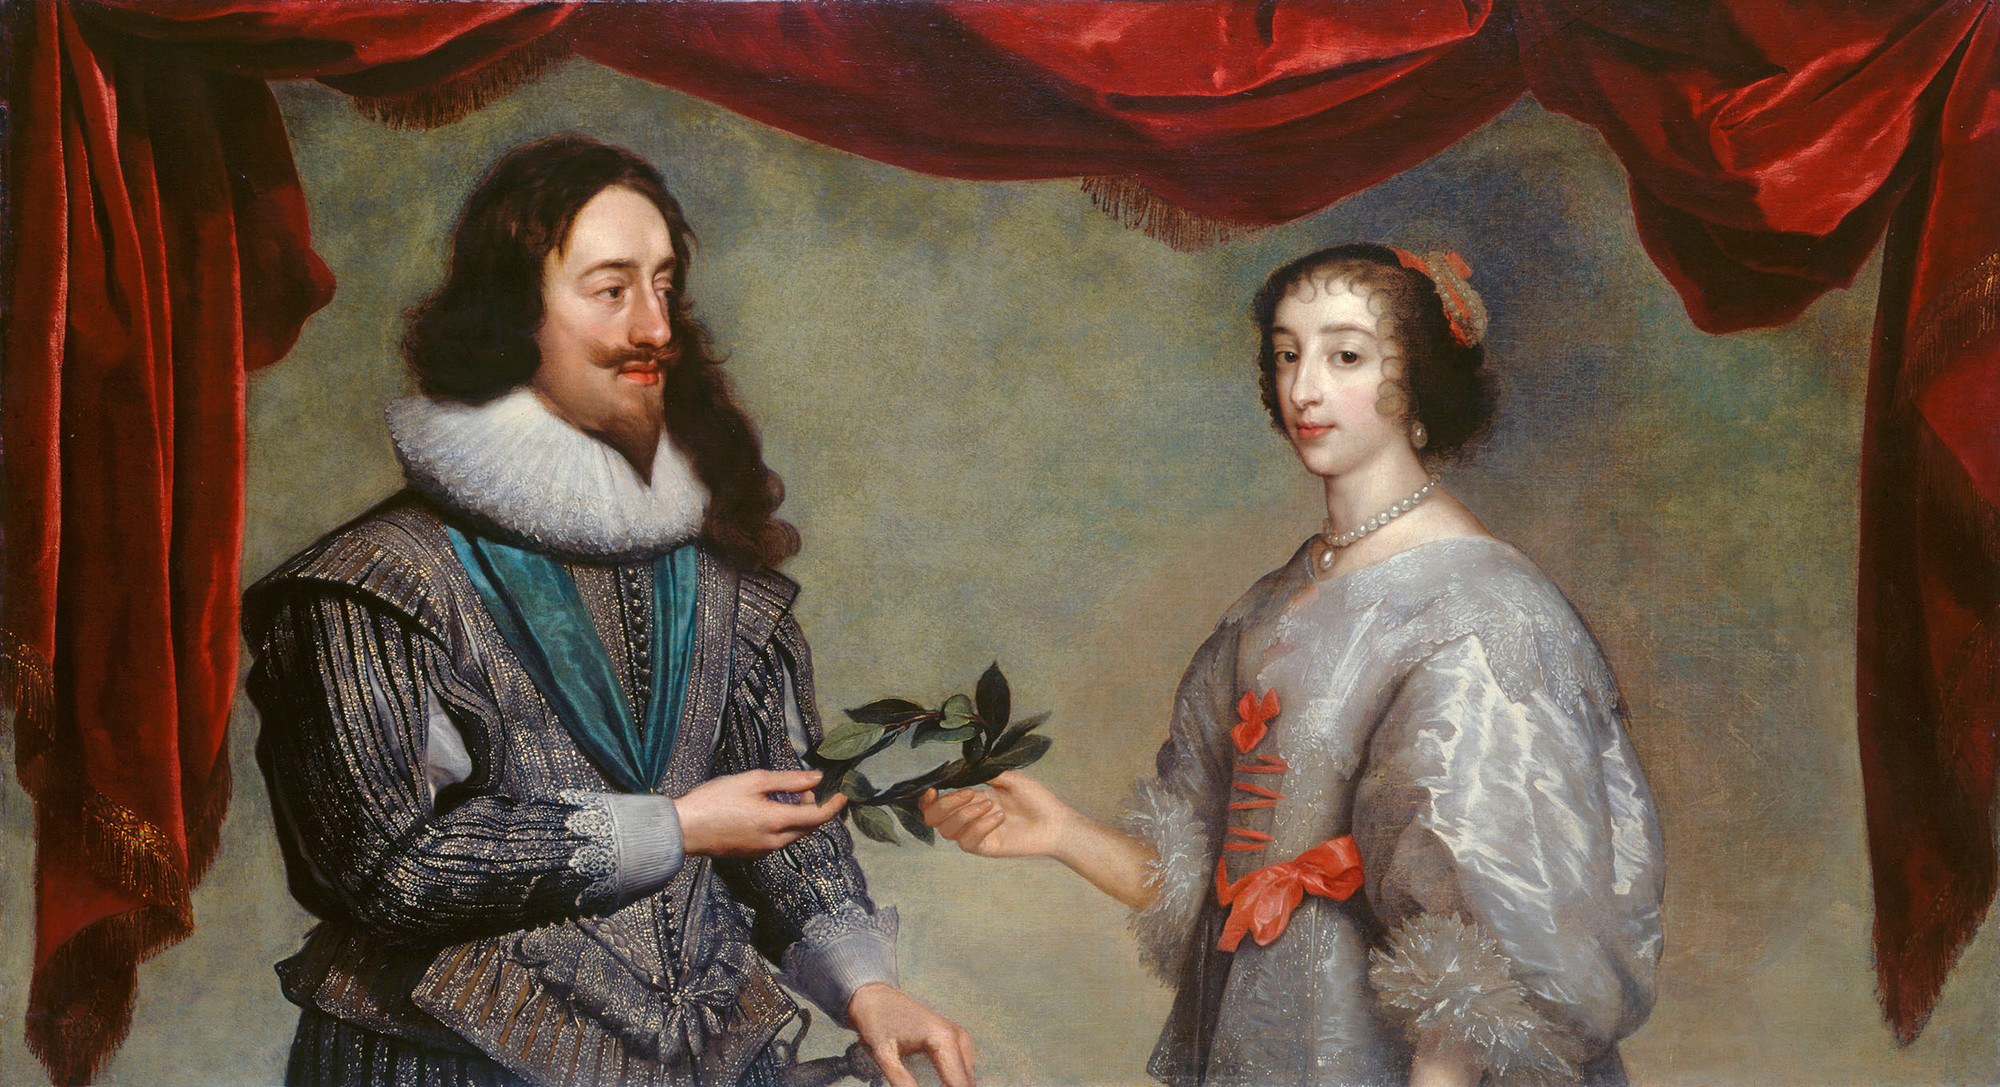 There are few paintings or etchings of Princess Mary before her marriage to Charles. 